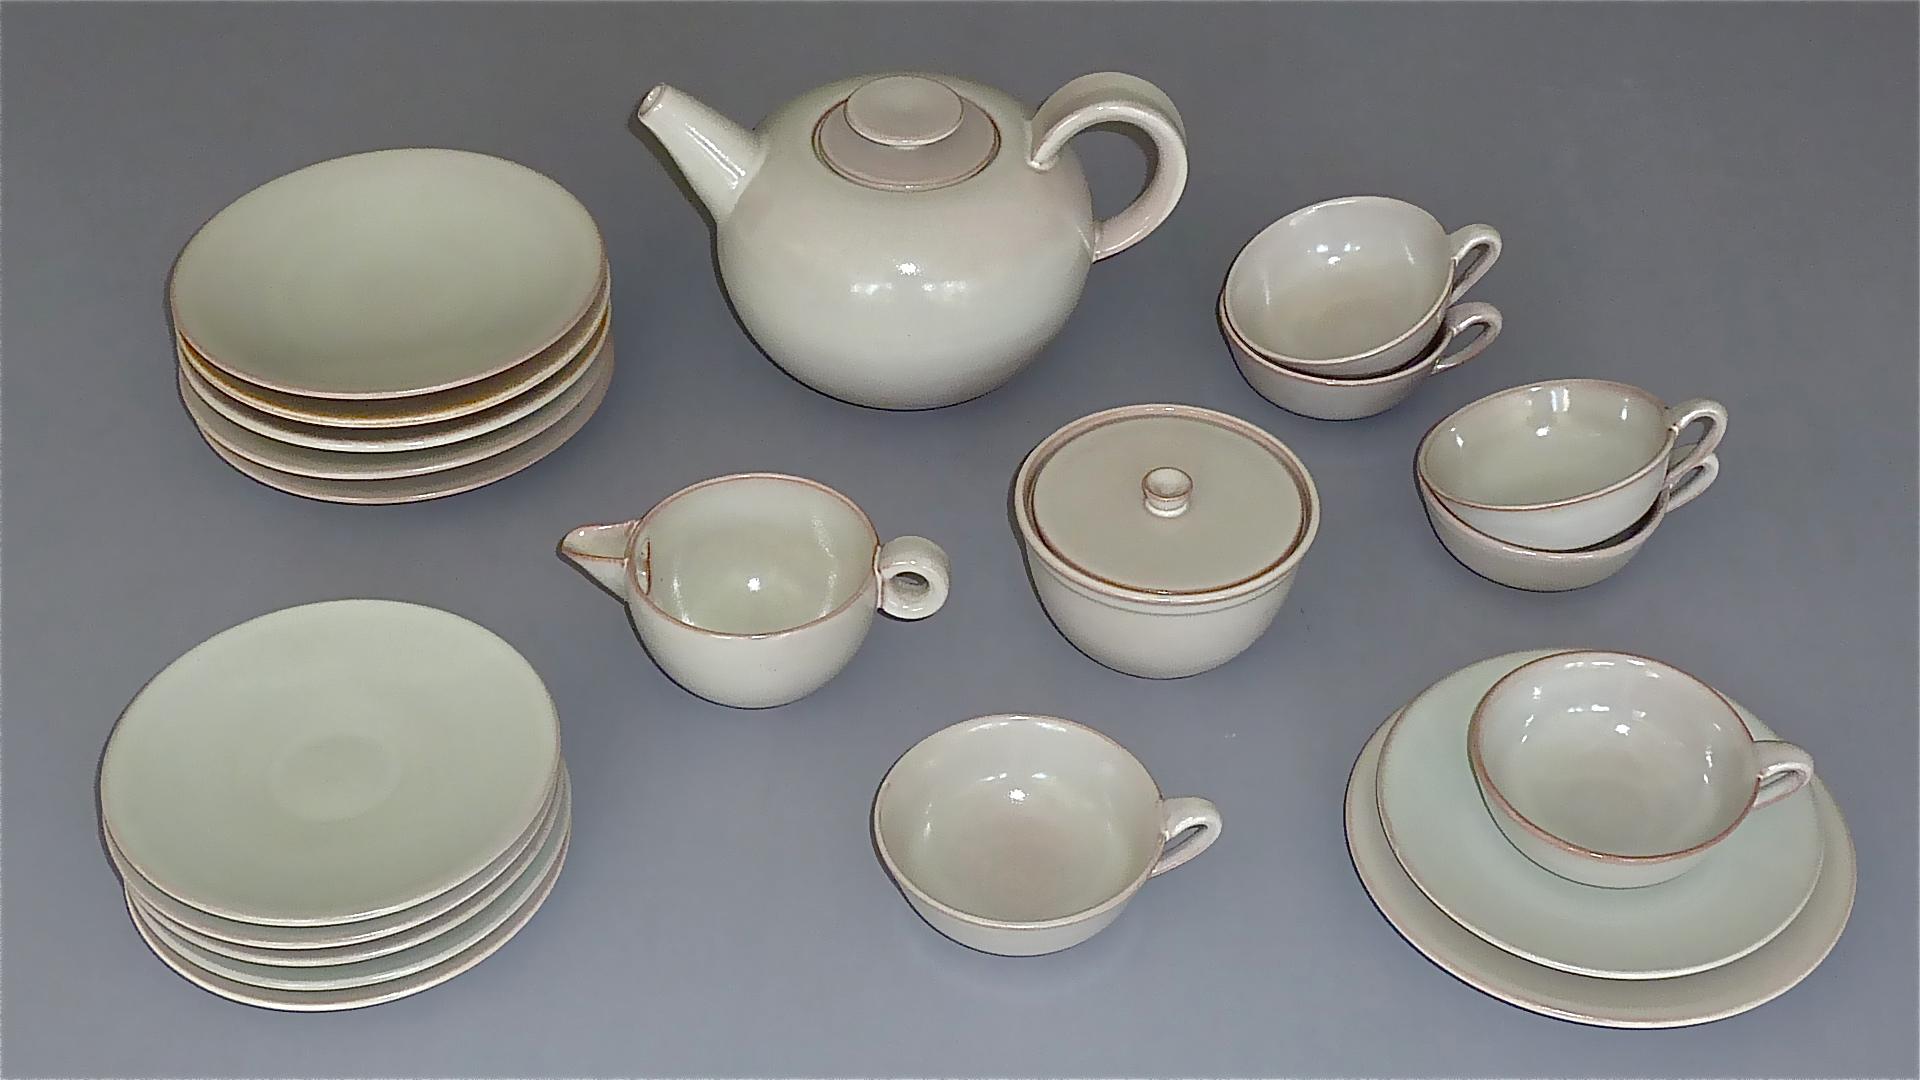 Rare Bauhaus tin-glazed crackled earthenware tea service designed by Otto Lindig and executed by Karlsruher Majolica, Germany 1923 / circa 1930. The complete set in creamy grey beige and faint rose to pink color for six persons includes, 1 tea pot